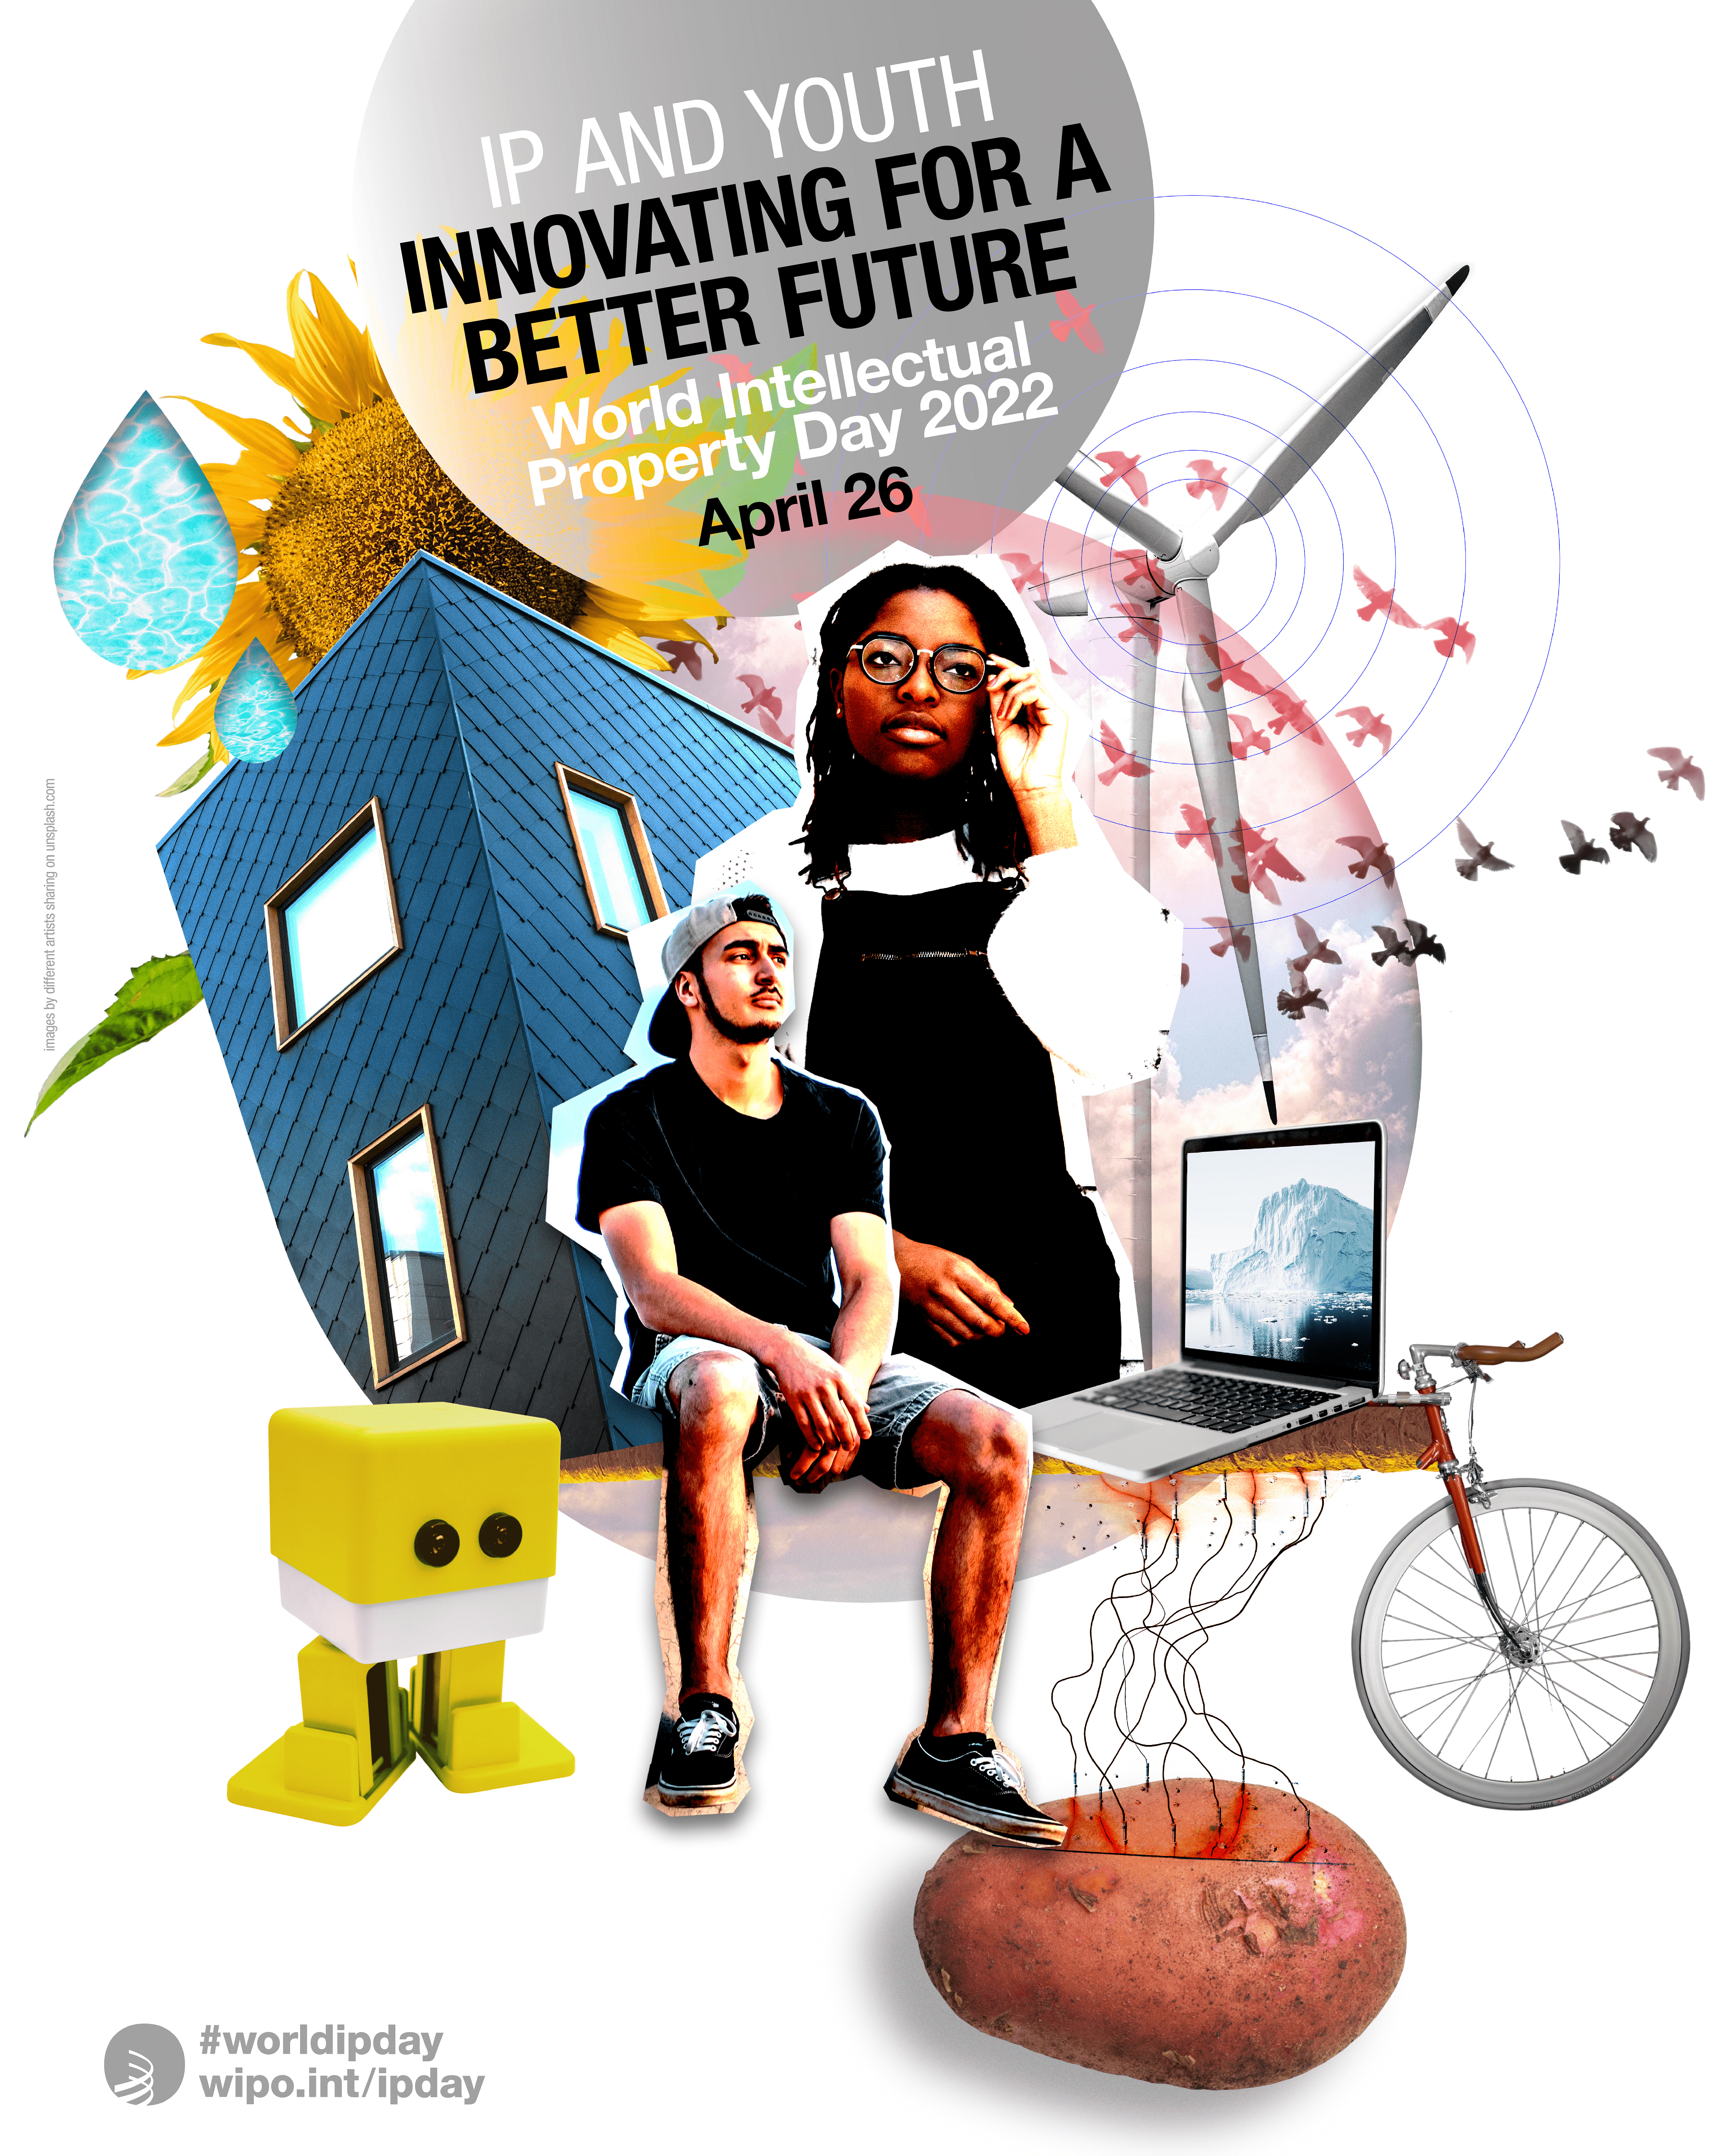 World IP Day 2022 “IP and Youth: Innovating for a Better Future”